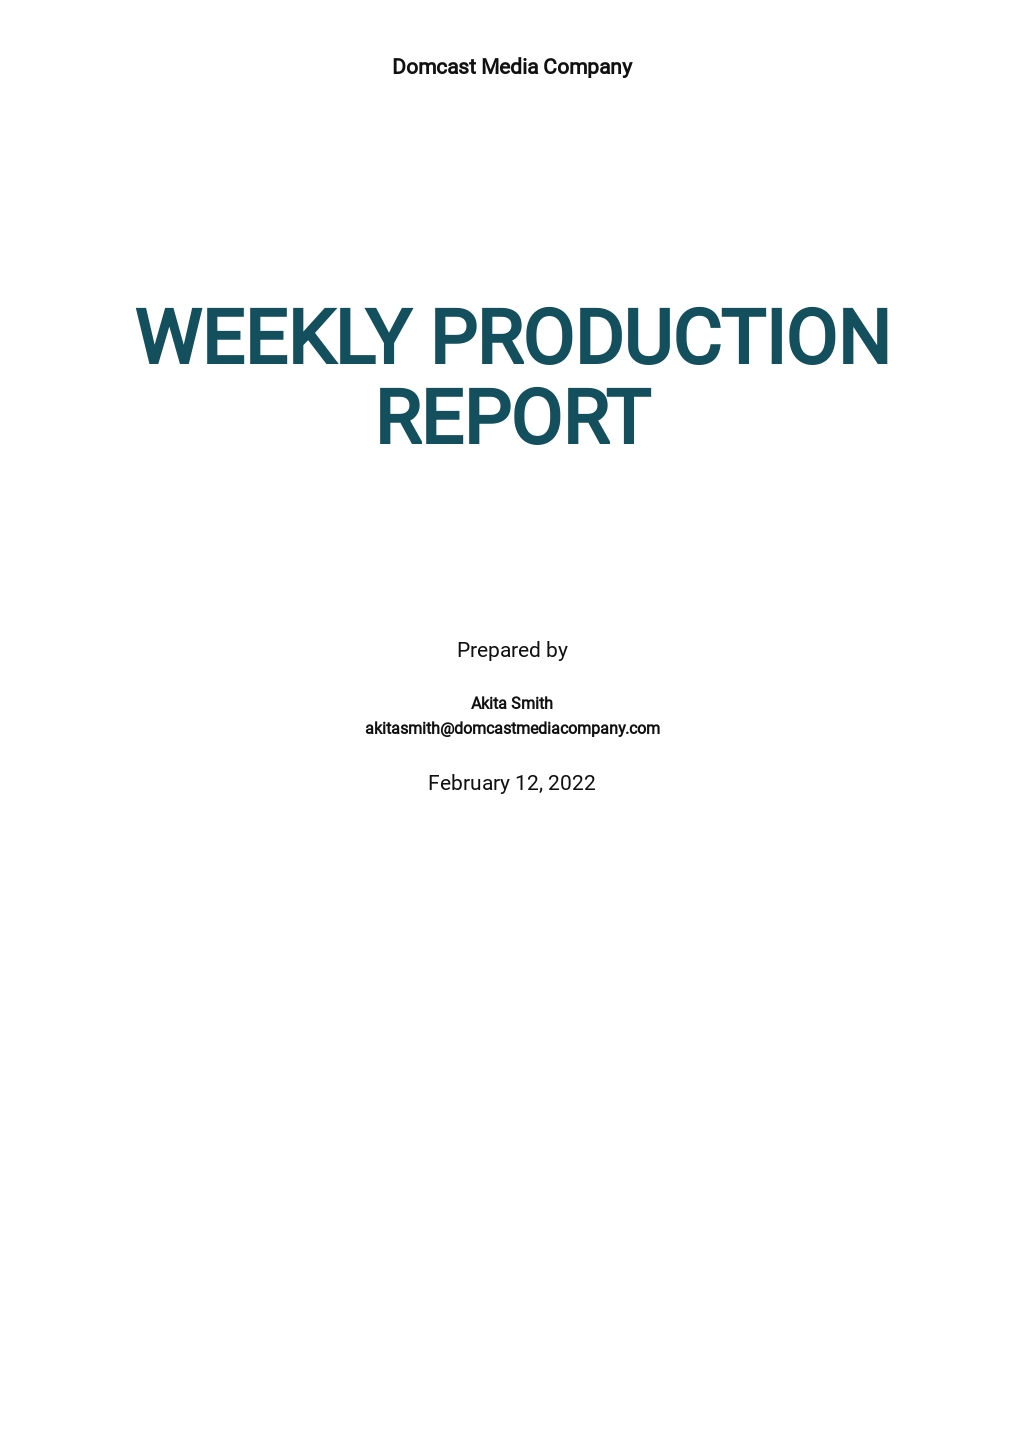 Daily Production Report Template.jpe